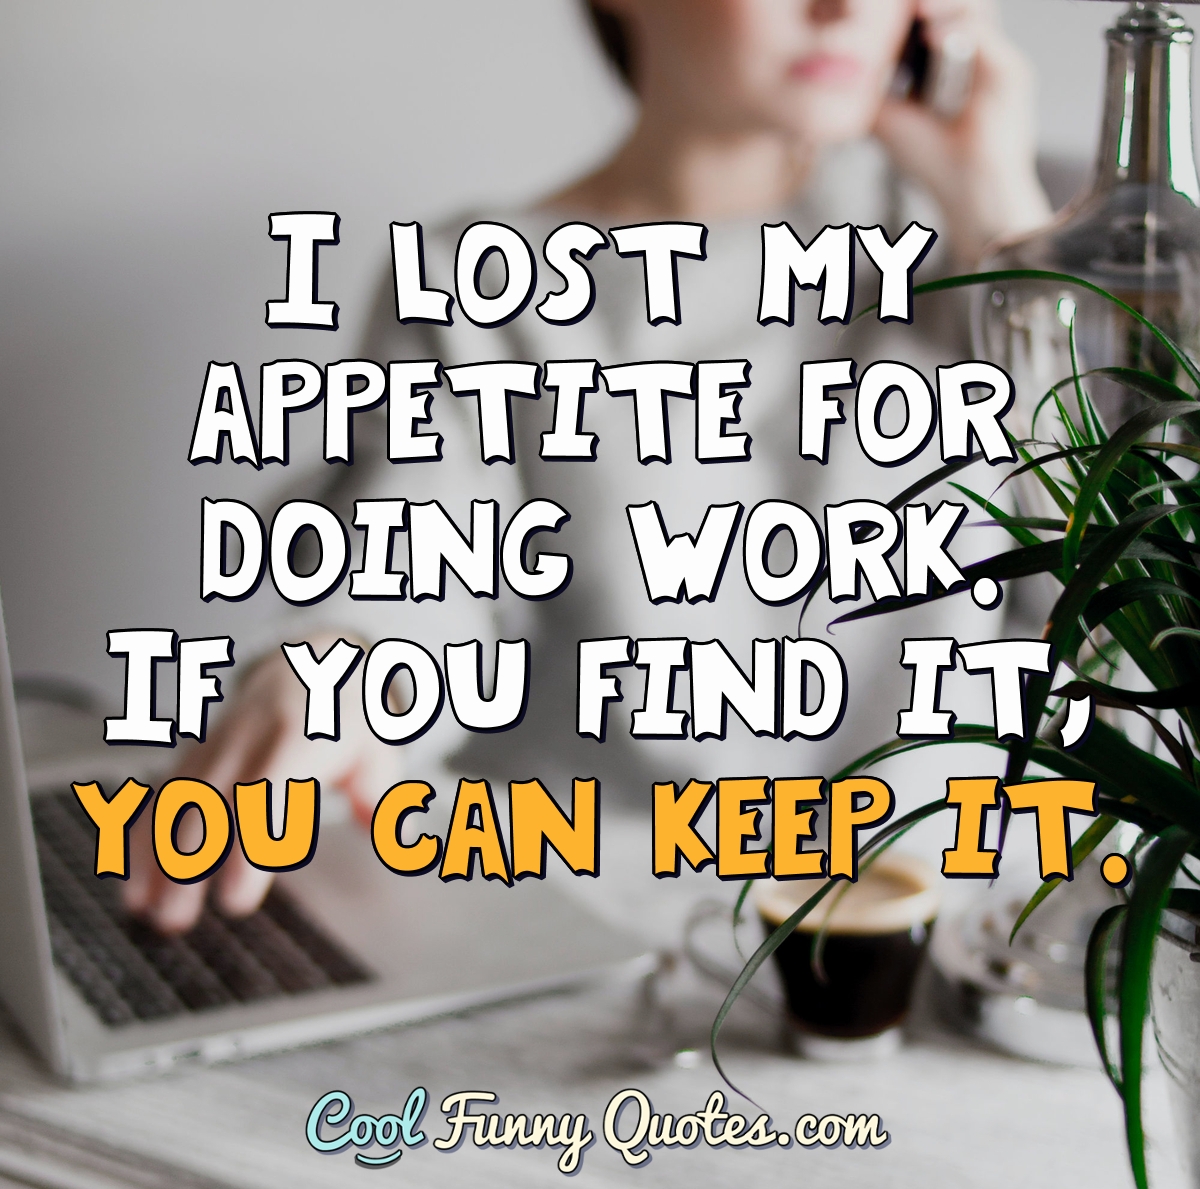 I lost my appetite for doing work. If you find it, you can keep it.